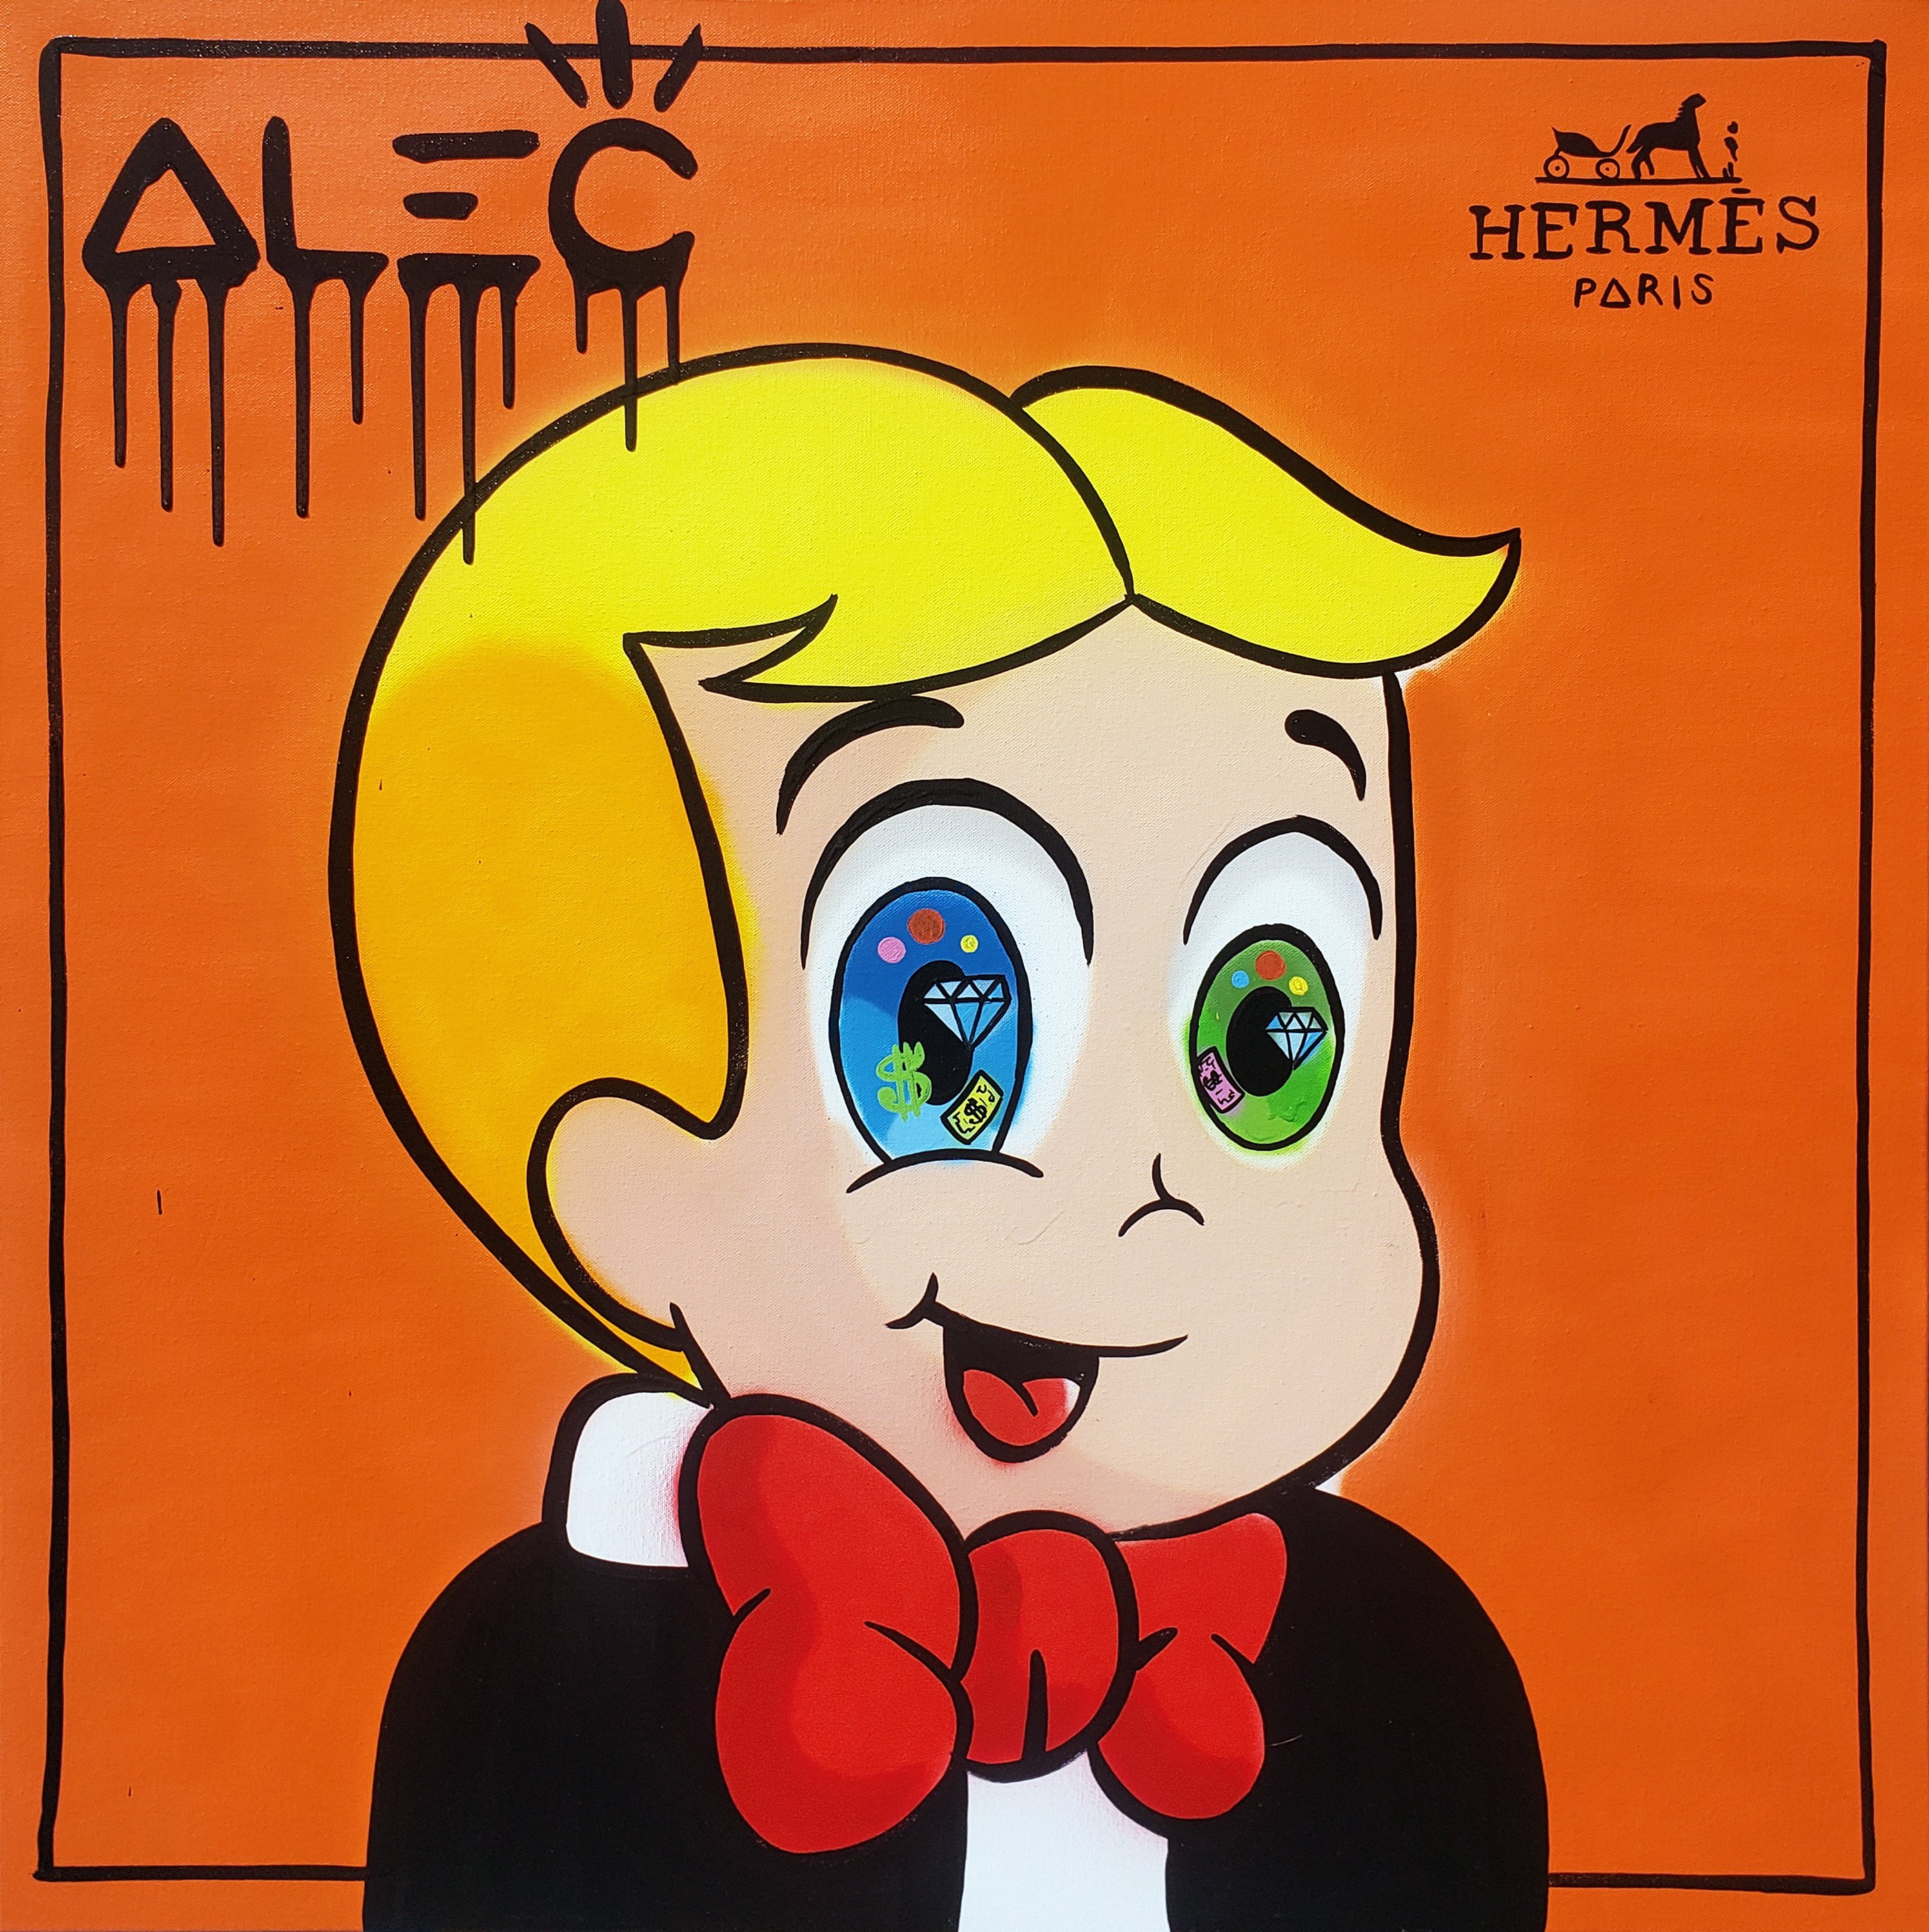 RAGS to RICHIE by Alec Monopoly on X: 🎩 TODAY is the